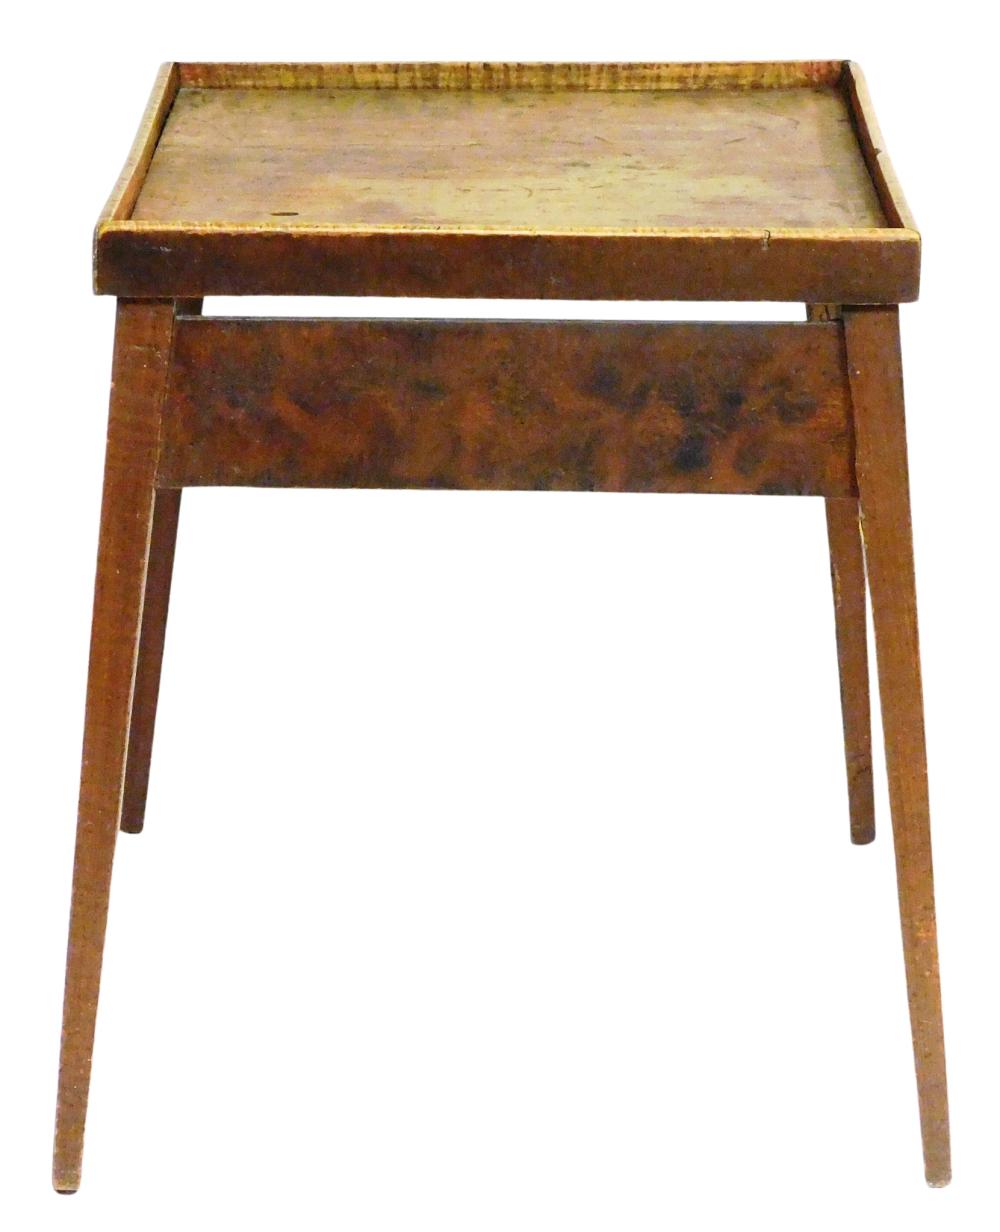 SPLAYED LEG WORKTABLE WITH SQUARE